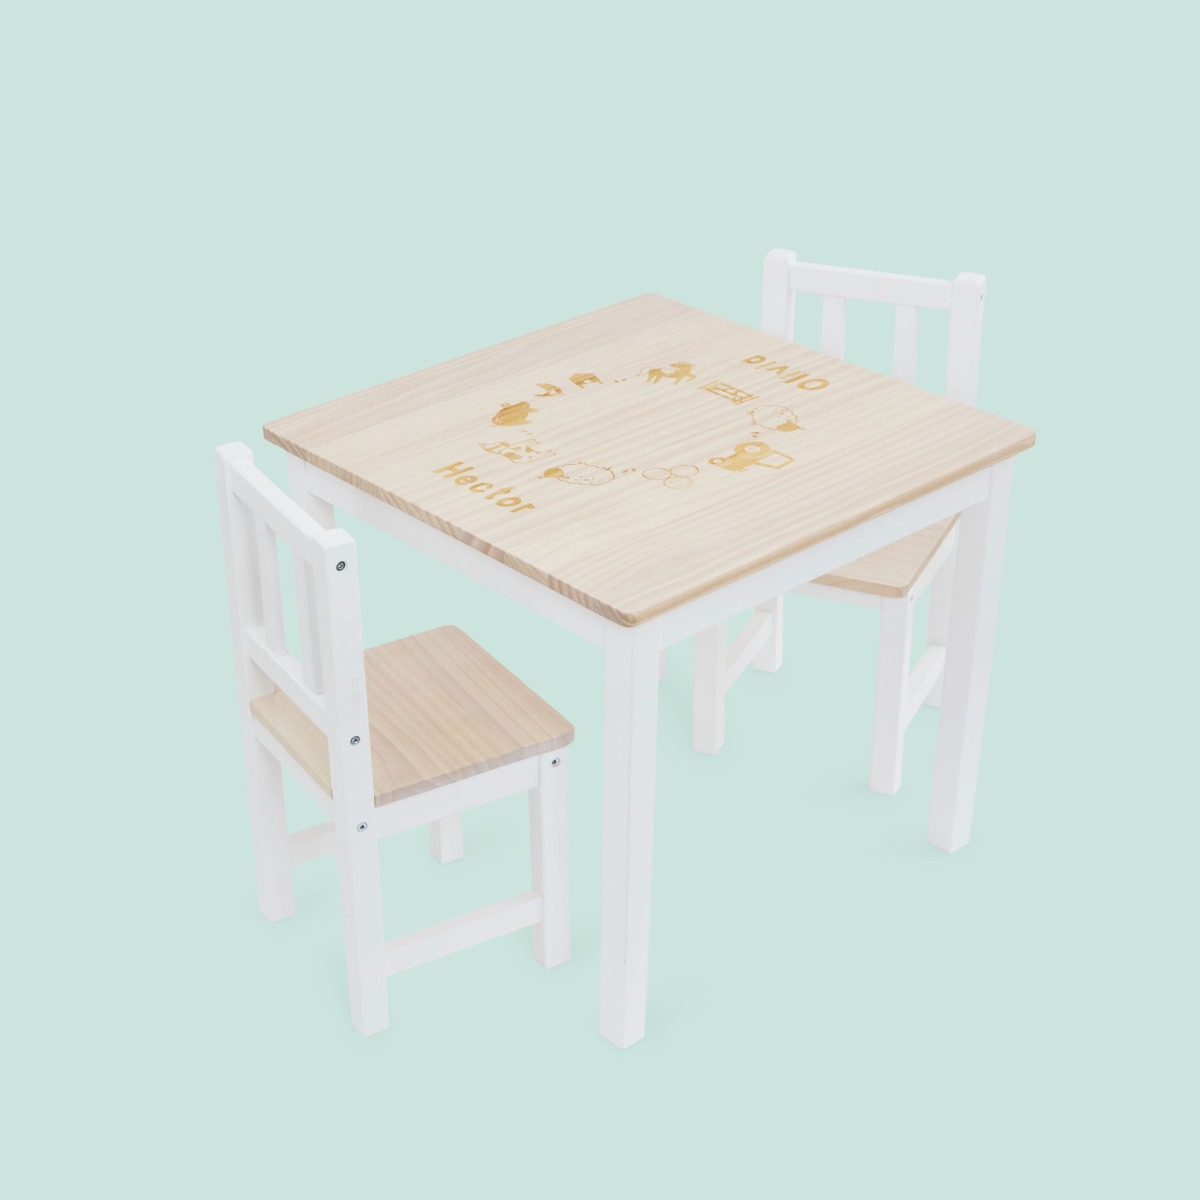 Personalised Farmyard Design Table and Chairs Set